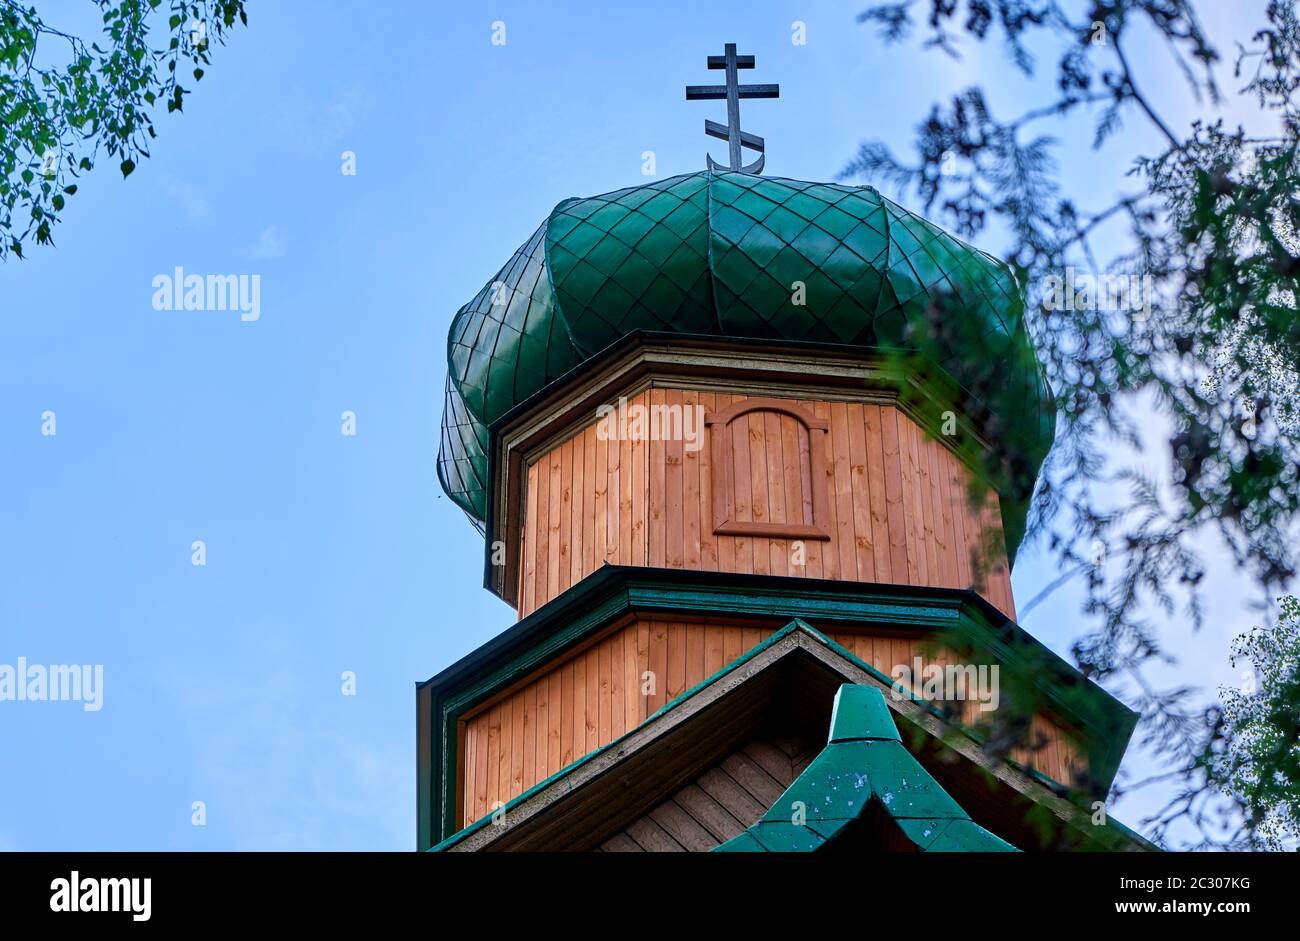 Wooden orthodox church steeple with cross Stock Photo